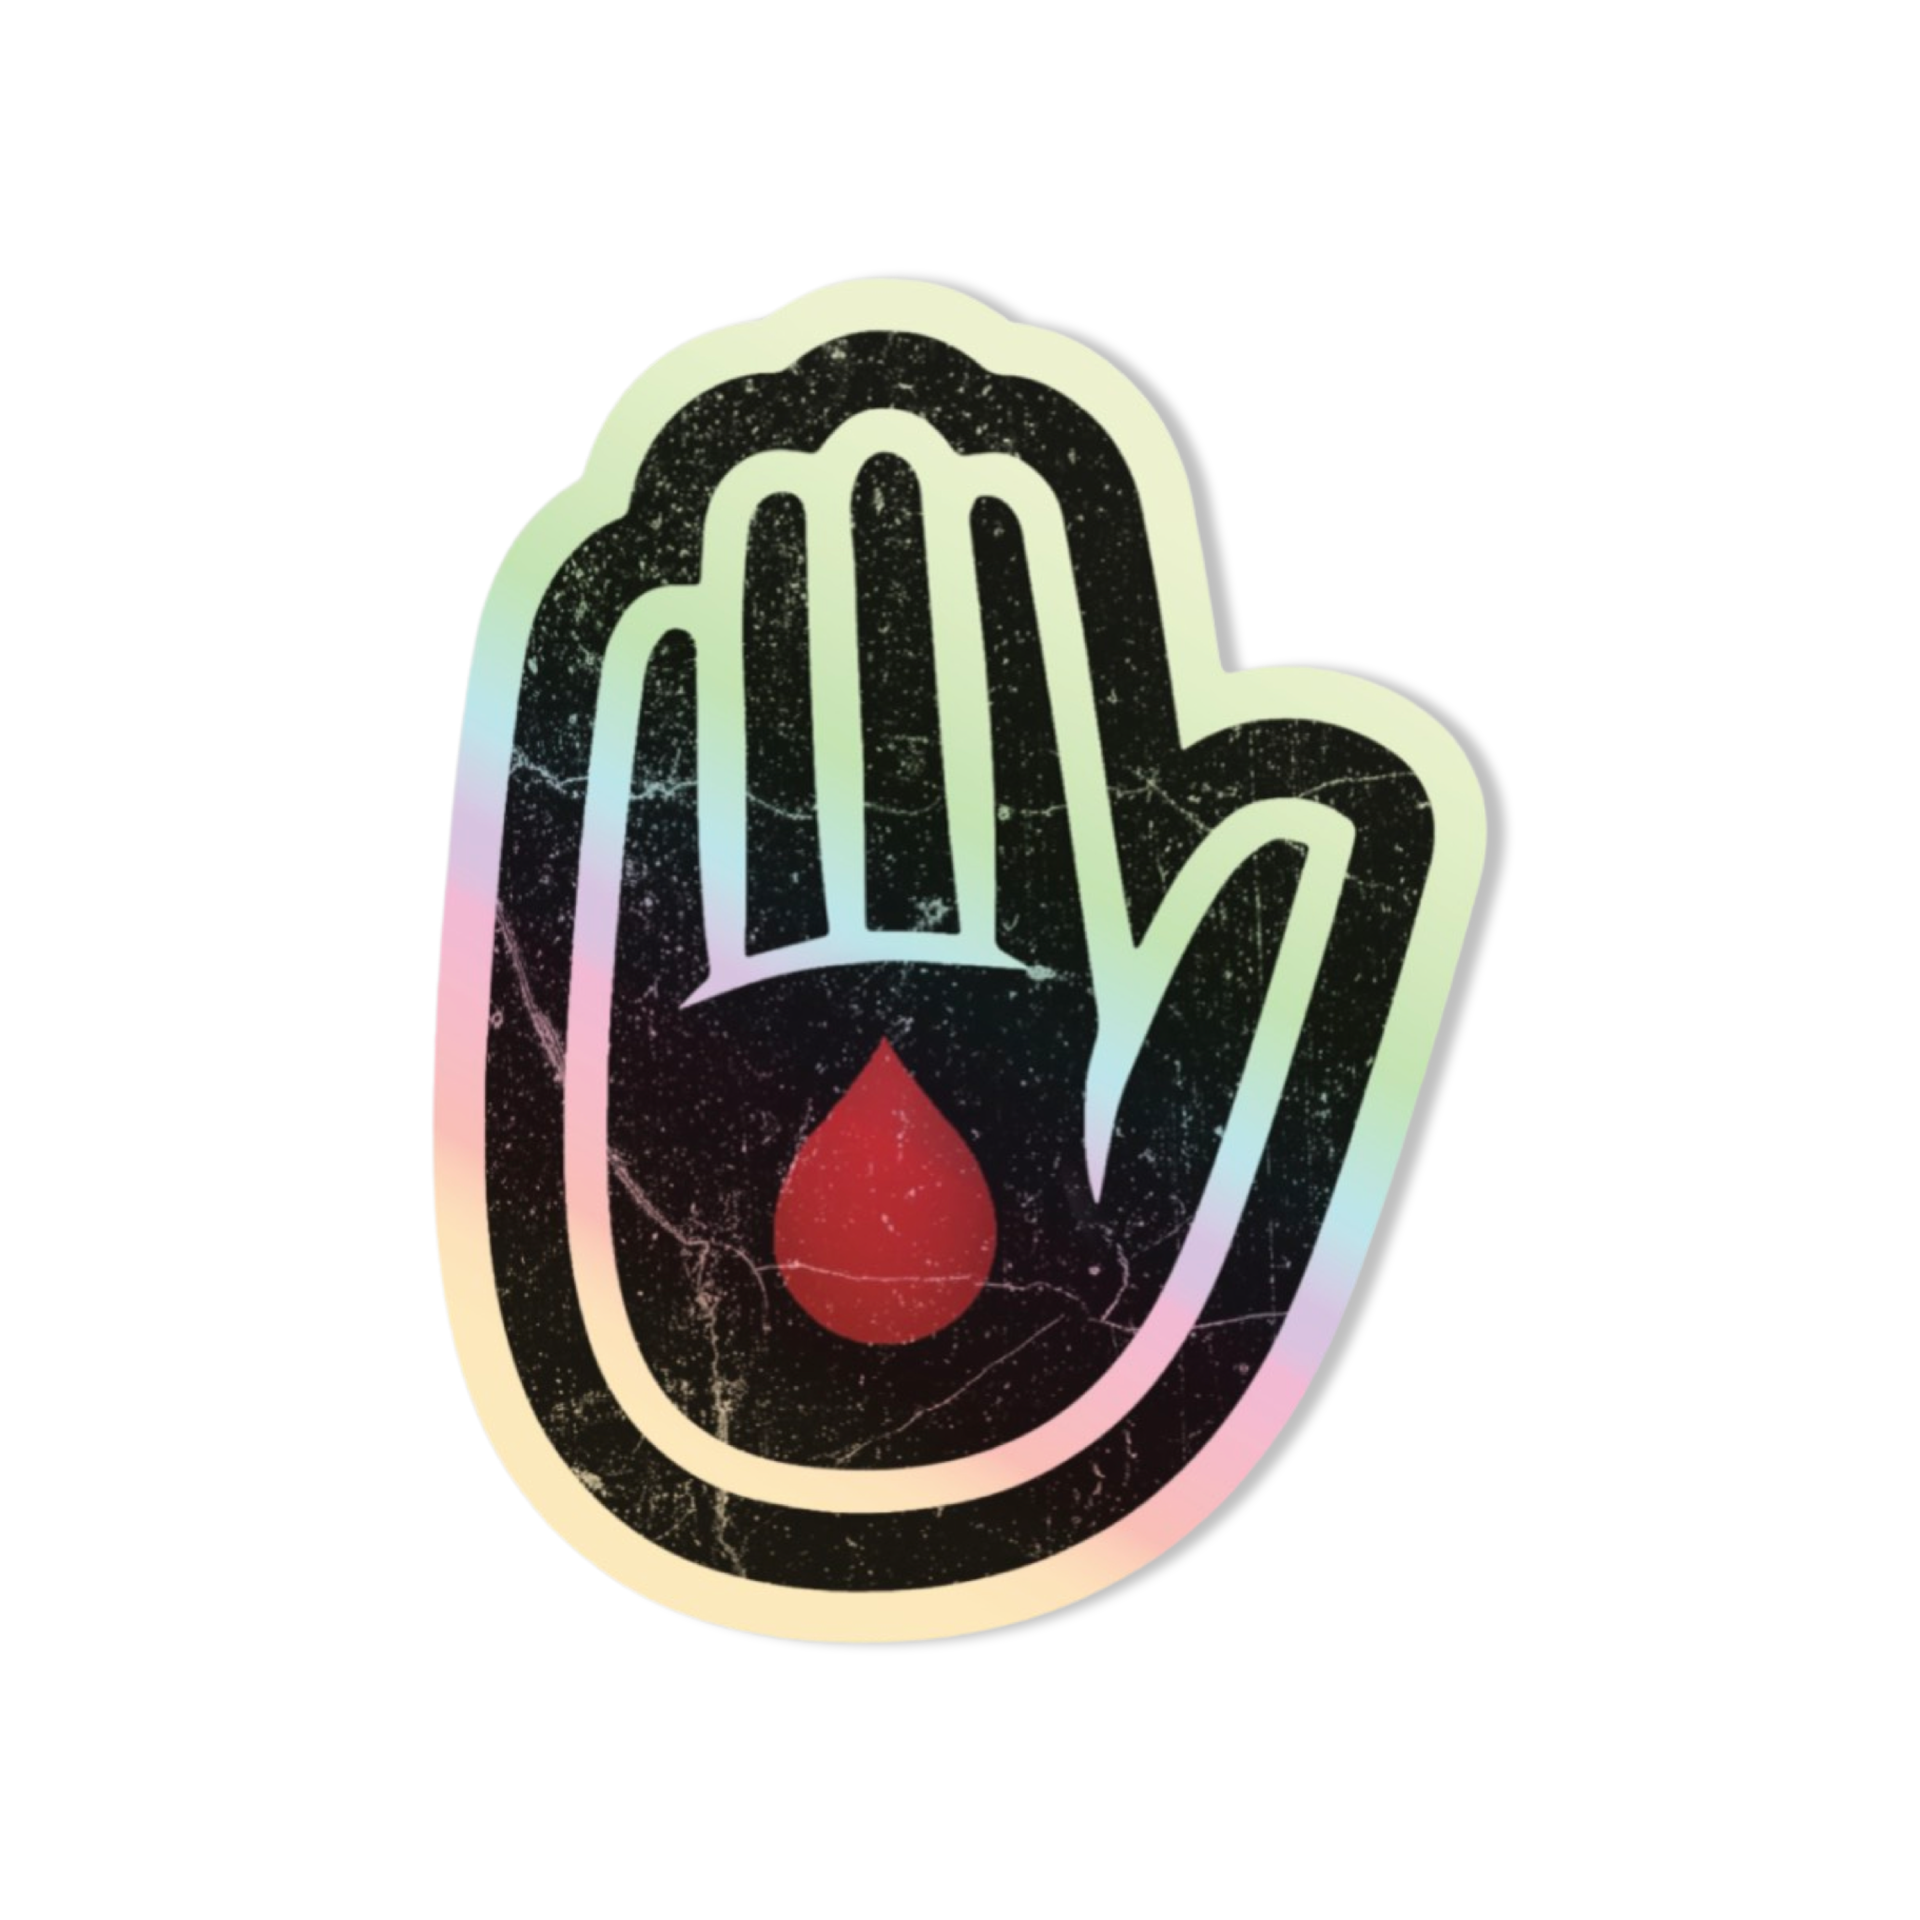 A sticker of a palm with a drop of blood in the middle.